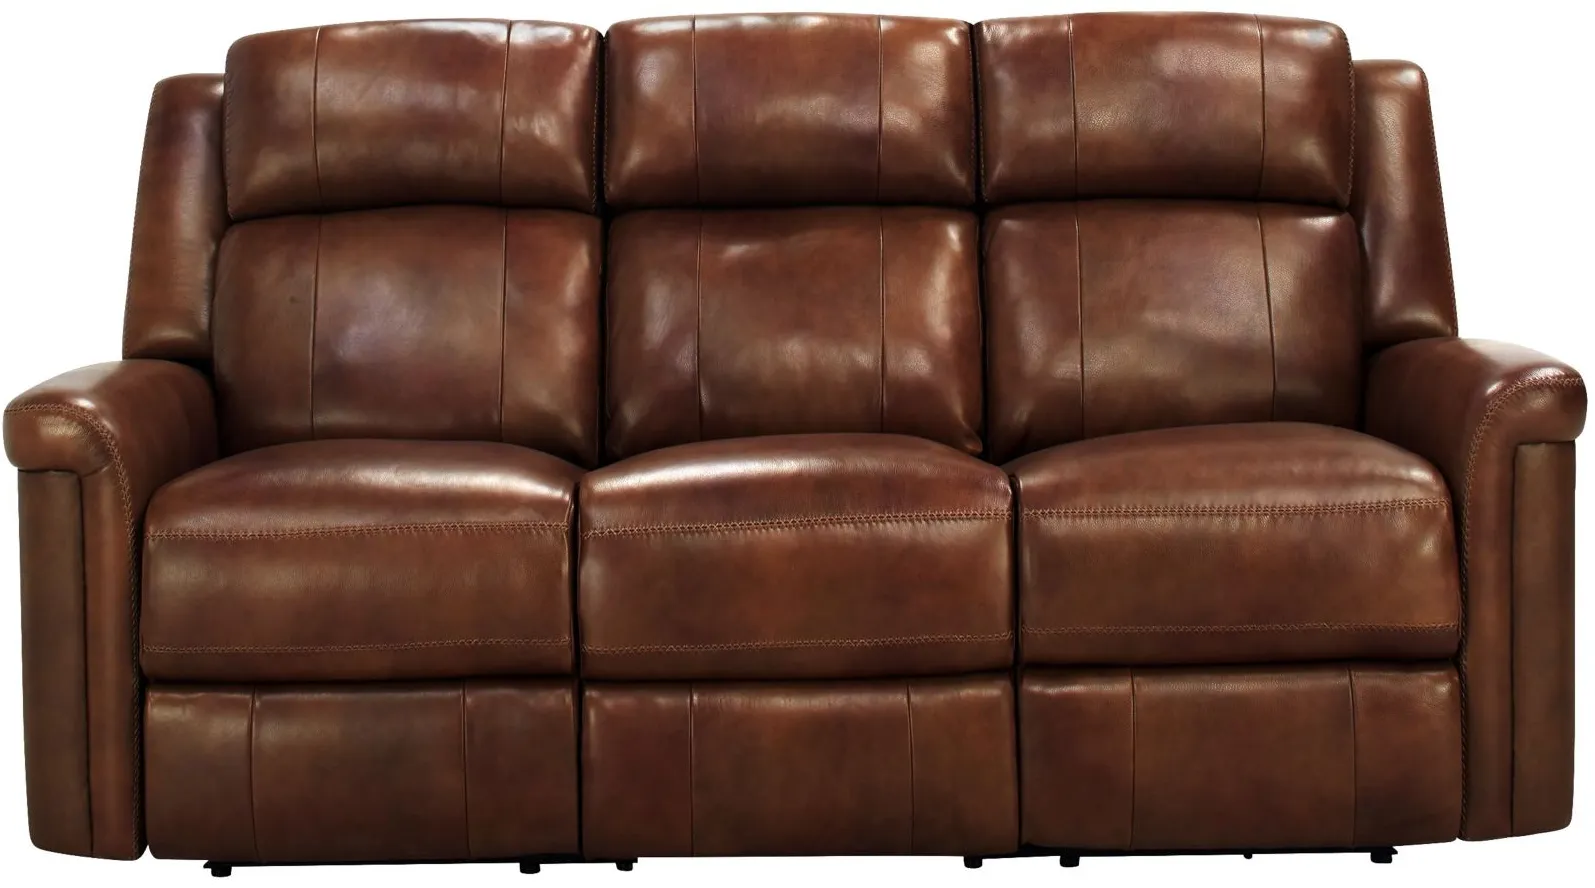 Richfield Leather Power Sofa with Power Headrest, Lumbar, and Drop Down Table in Brown by Bellanest